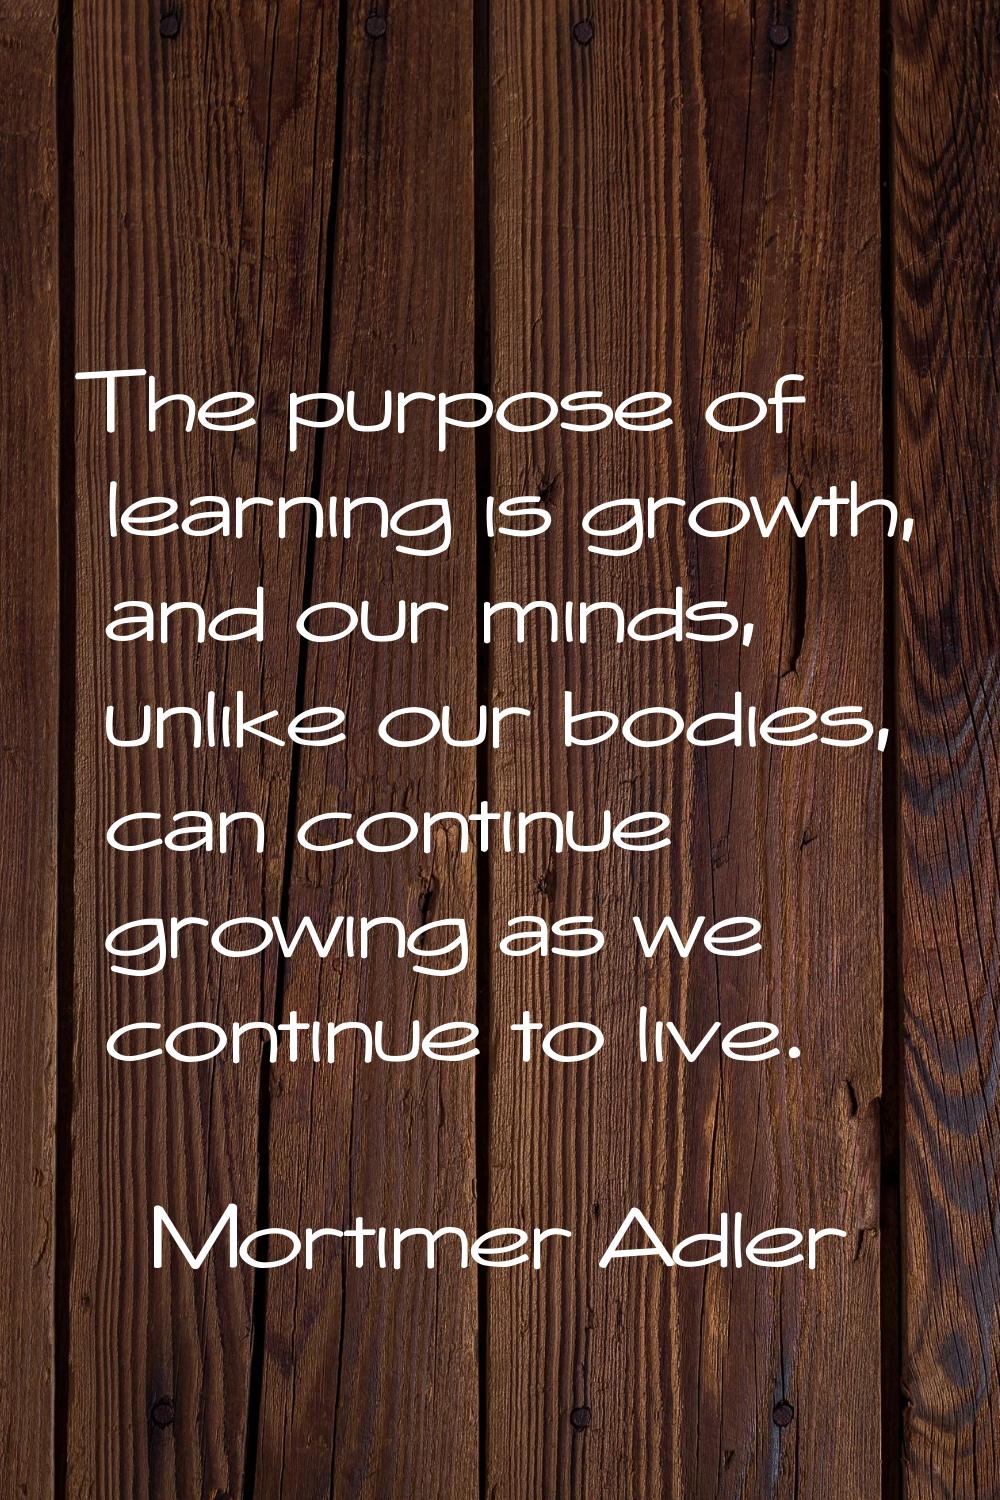 The purpose of learning is growth, and our minds, unlike our bodies, can continue growing as we con